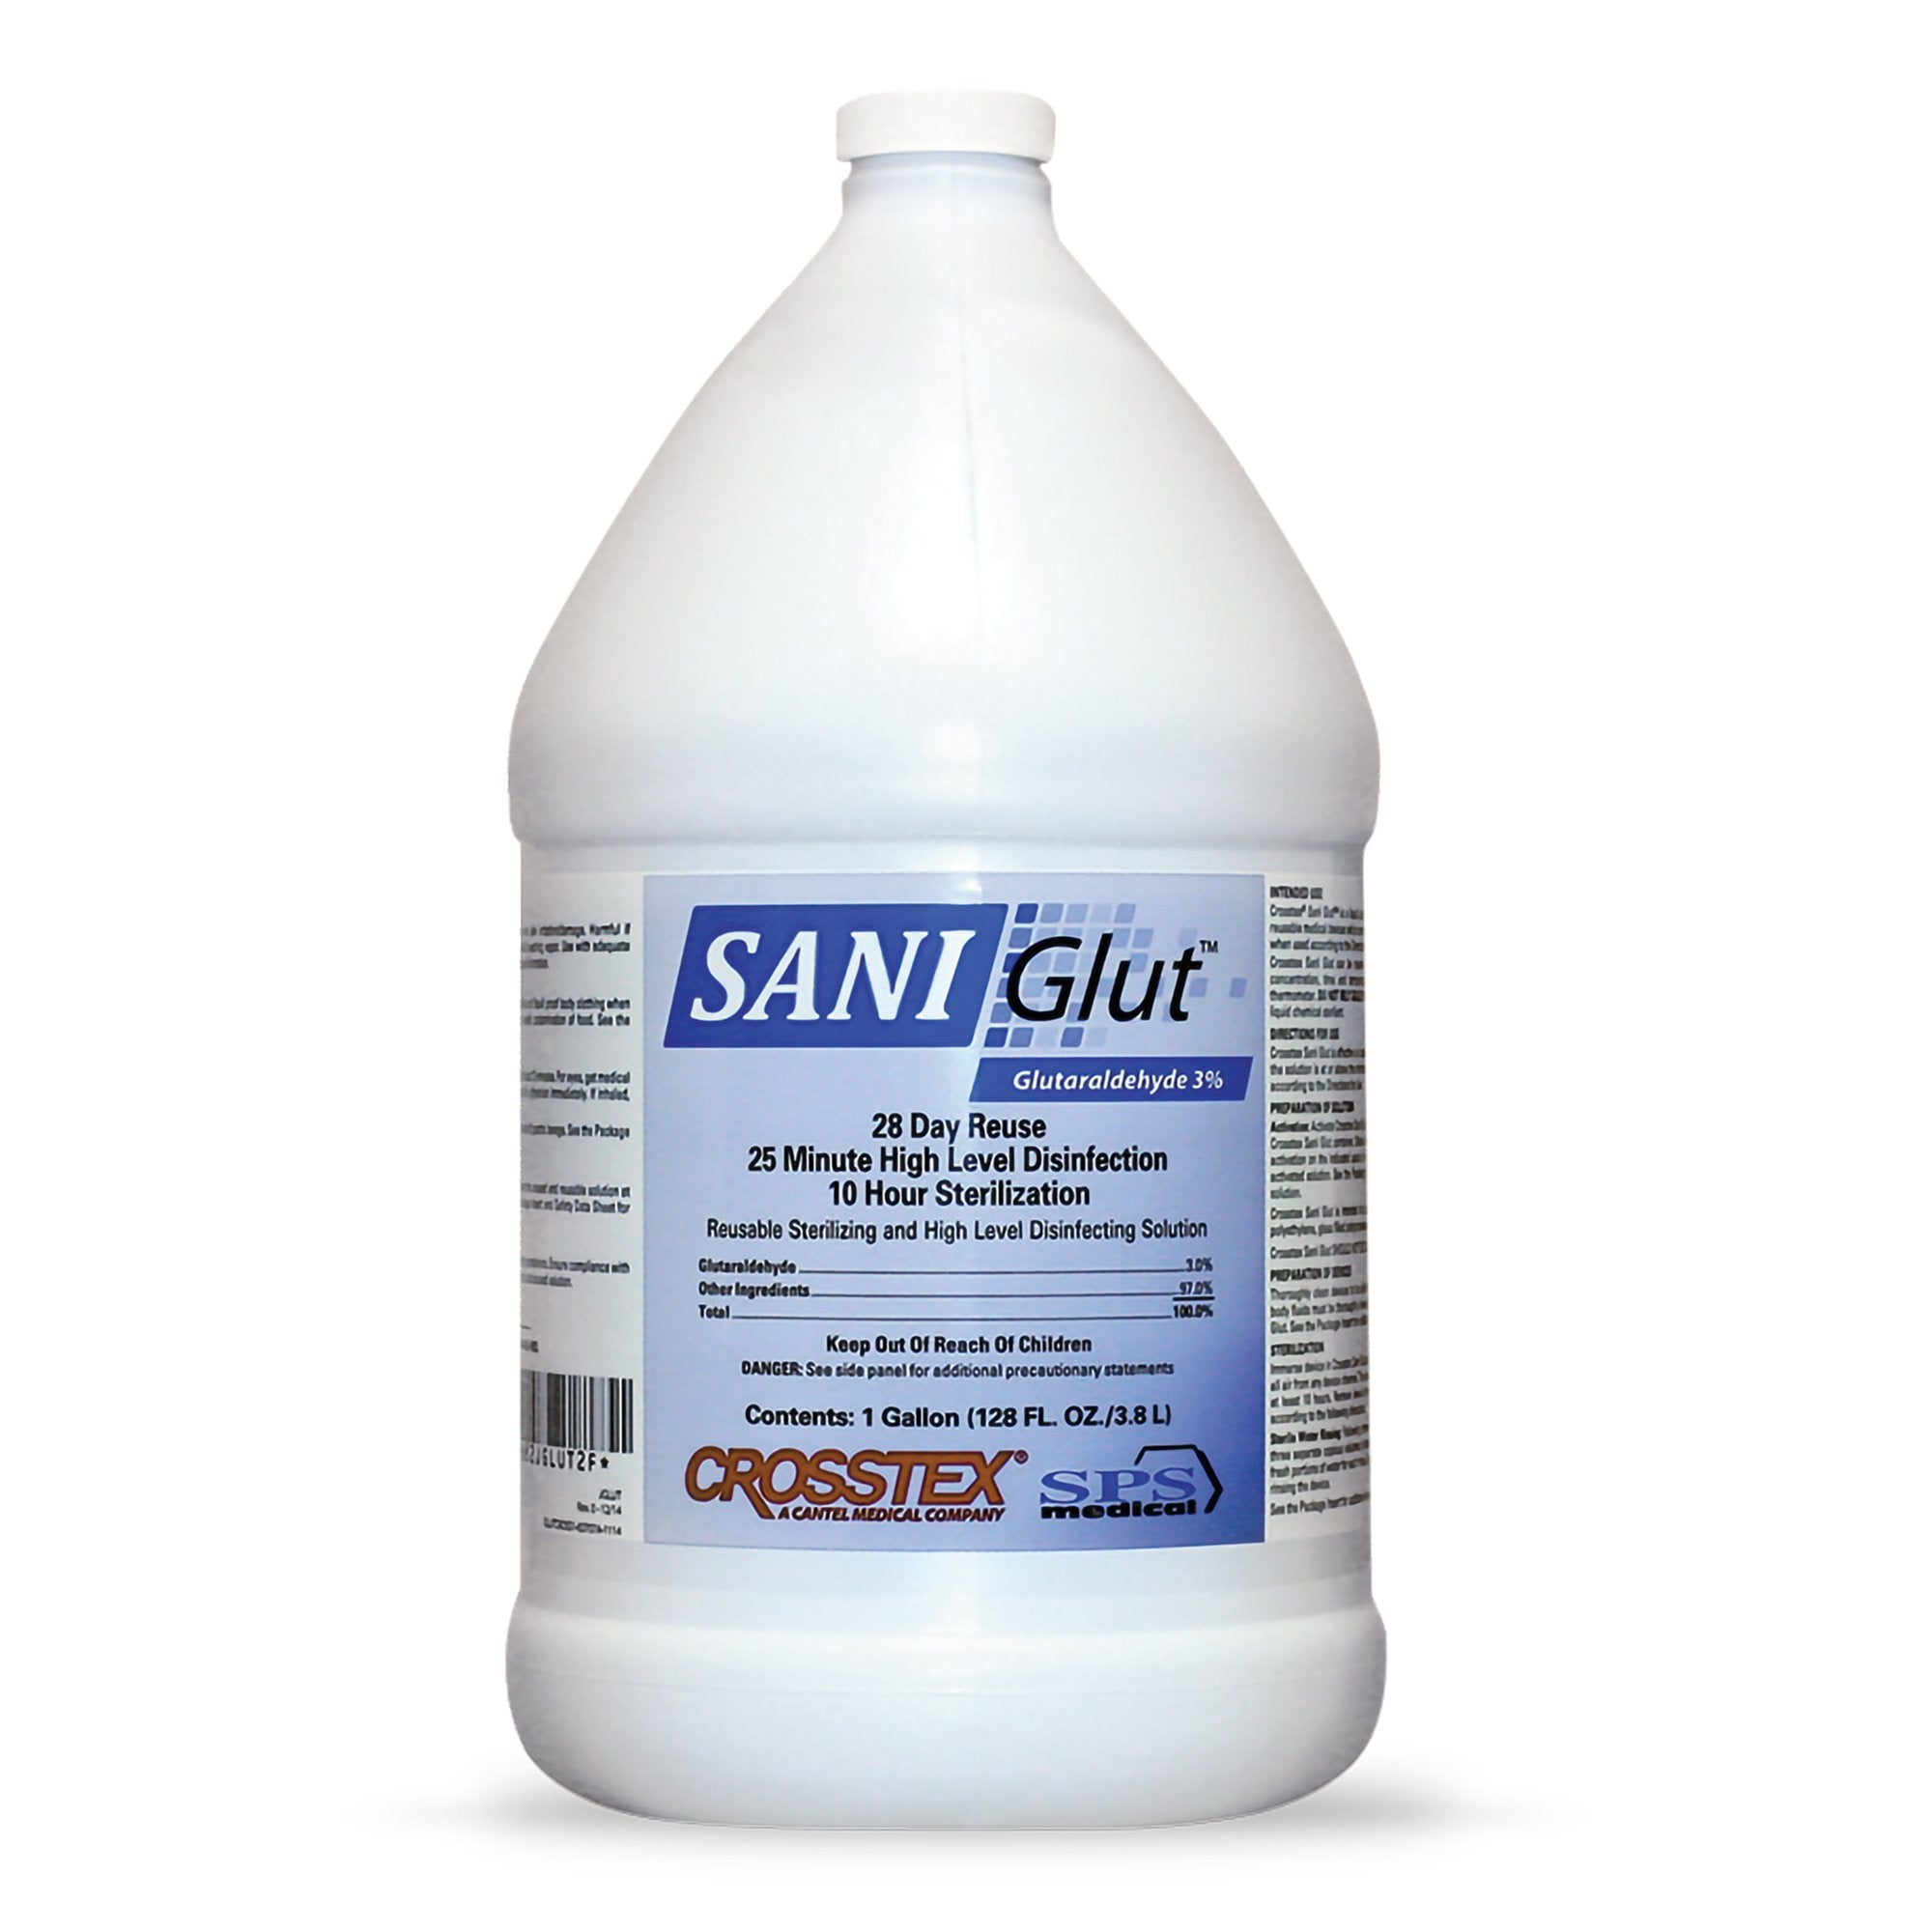 Glutaraldehyde High-Level Disinfectant SANI Glut™ Activation Required Liquid 1 gal. Jug Max 28 Day Reuse